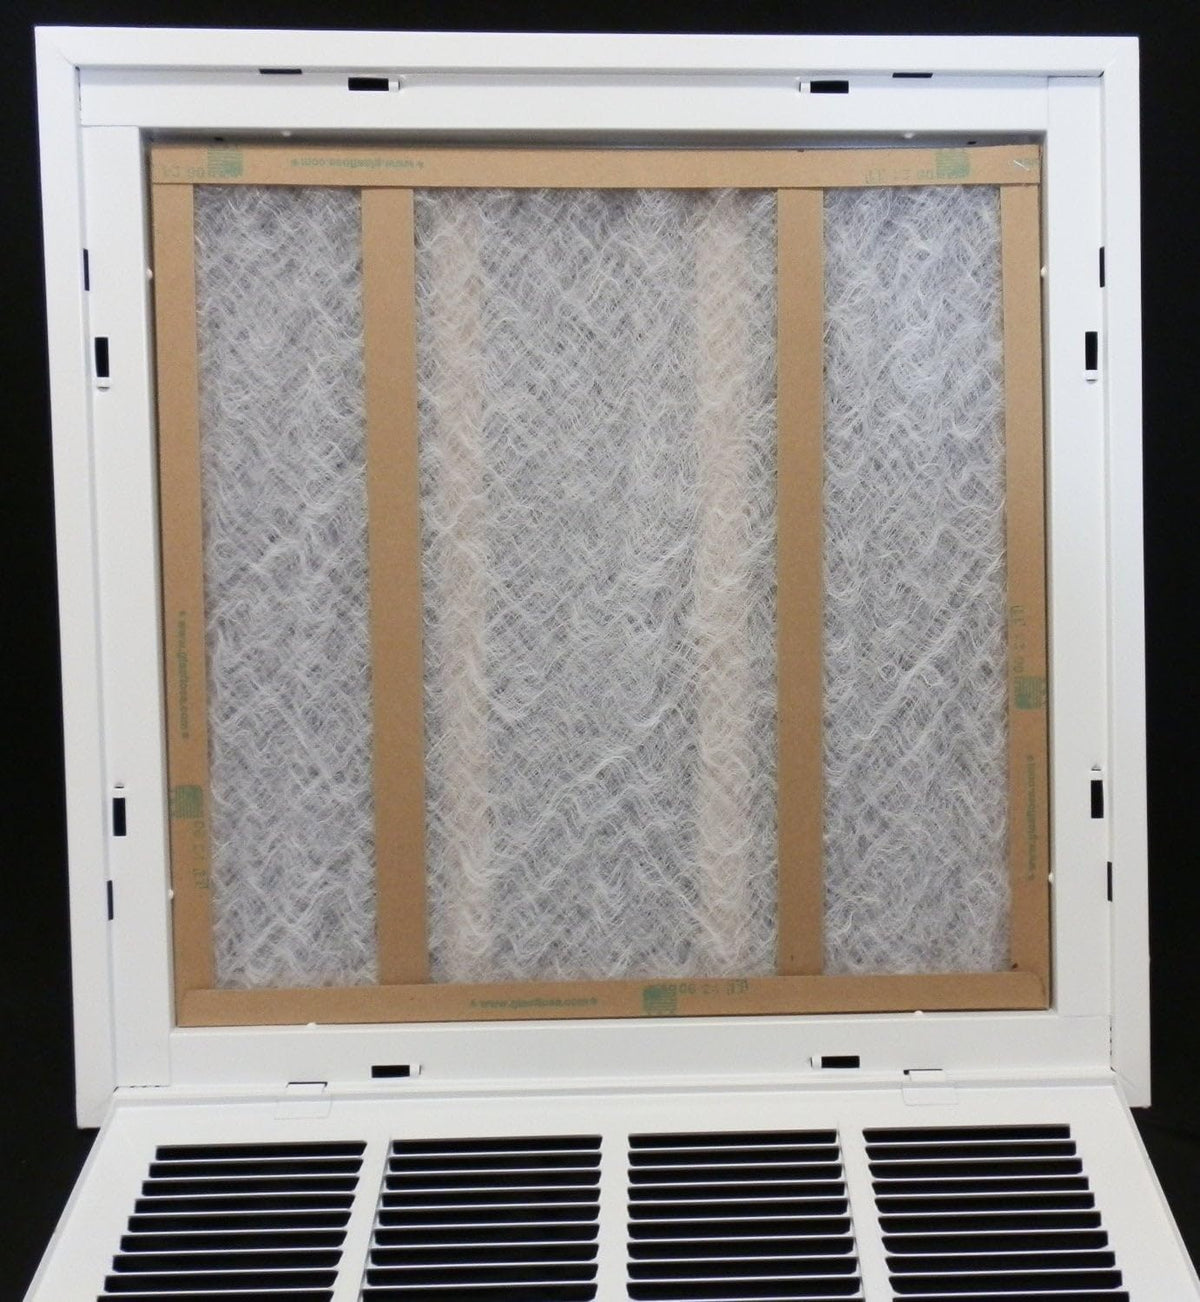 16&quot; X 24&quot; Steel Return Air Filter Grille for 1&quot; Filter - Removable Frame - [Outer Dimensions: 18 5/8&quot; X 26 5/8&quot;]